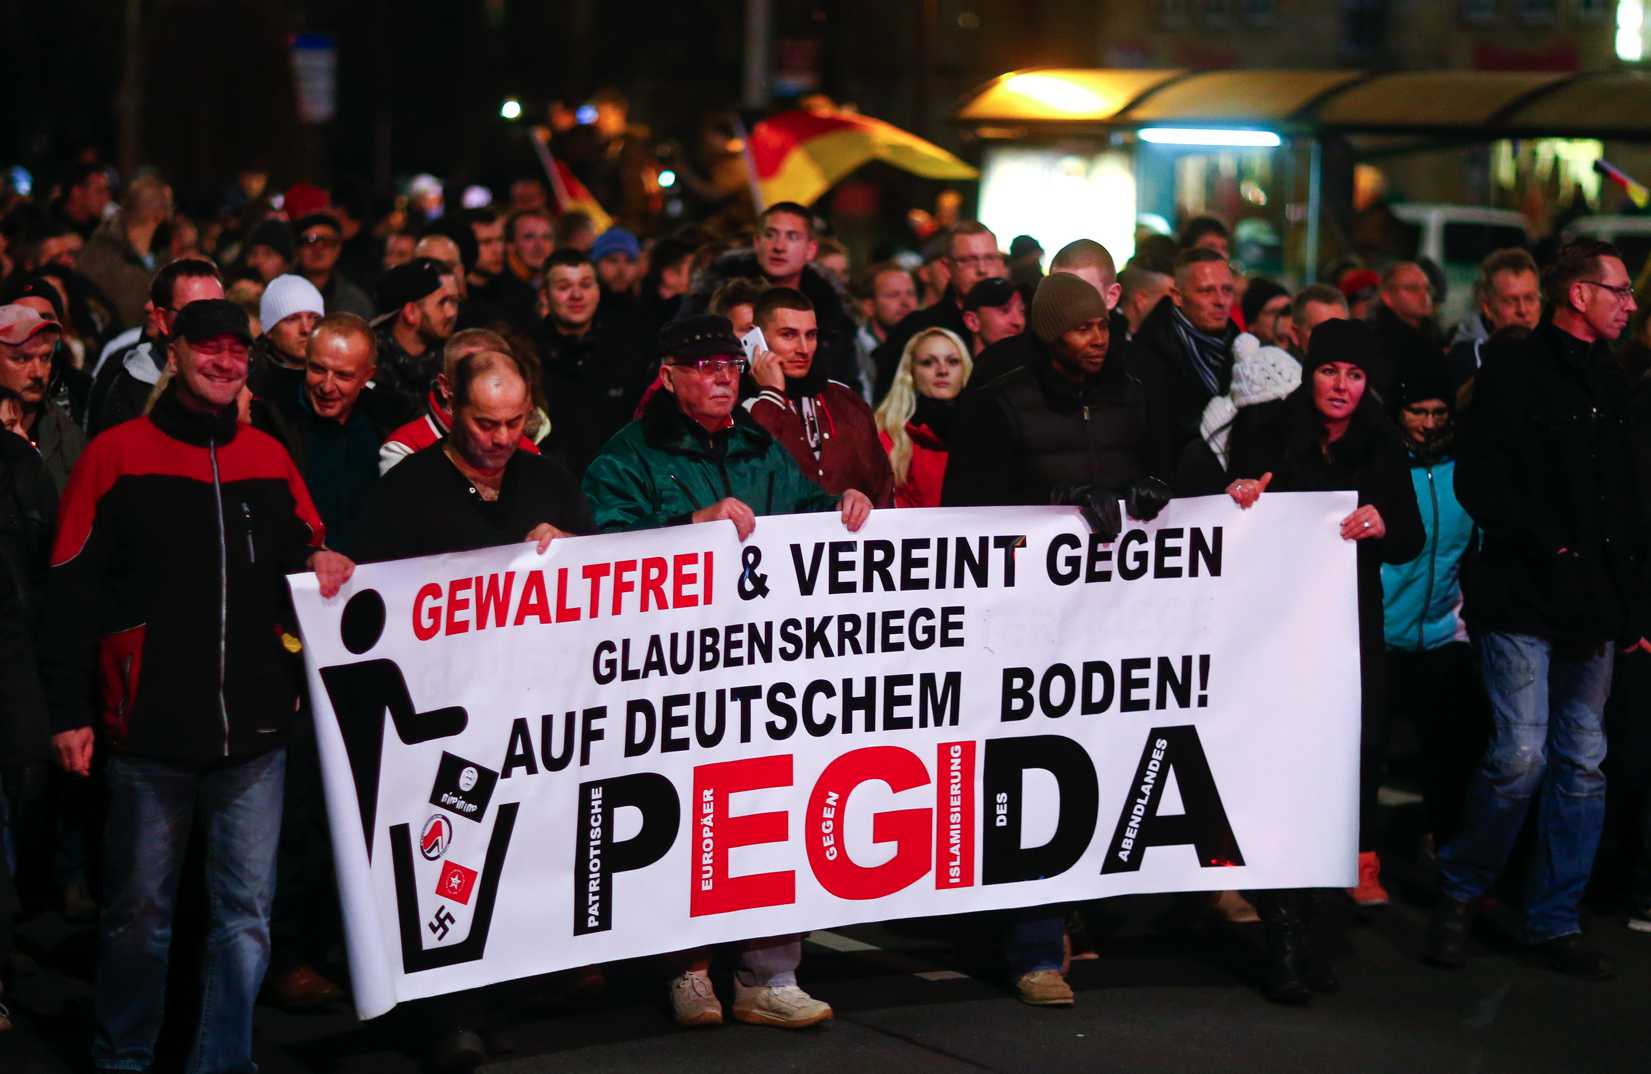 Participants hold a banner during a demonstration called by anti-immigration group Patriotic Europeans Against the Islamization of the West (Pegida) in Dresden, Germany, on Dec. 15, 2014 (Hannibal Hanschke—Reuters)